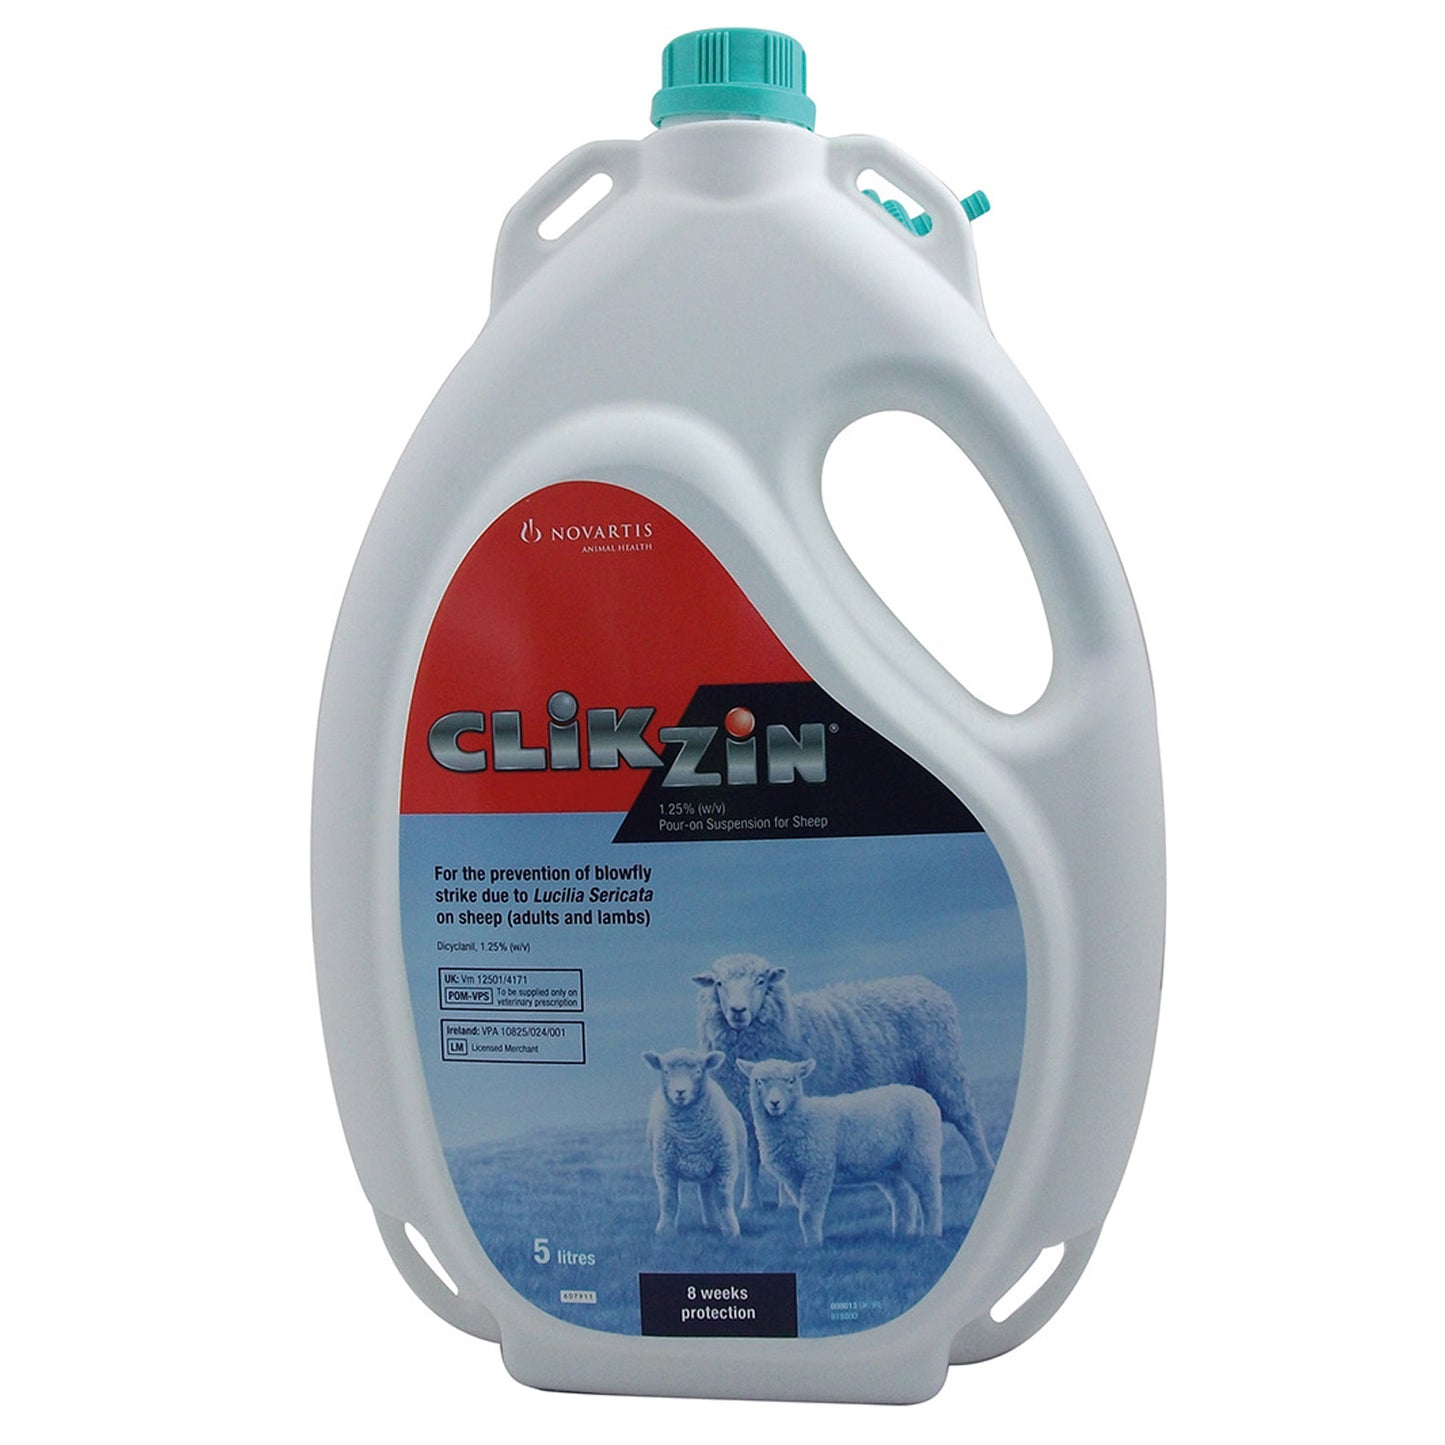 CLiKZiN 12.5 mg/ml Pour-On Suspension for Sheep